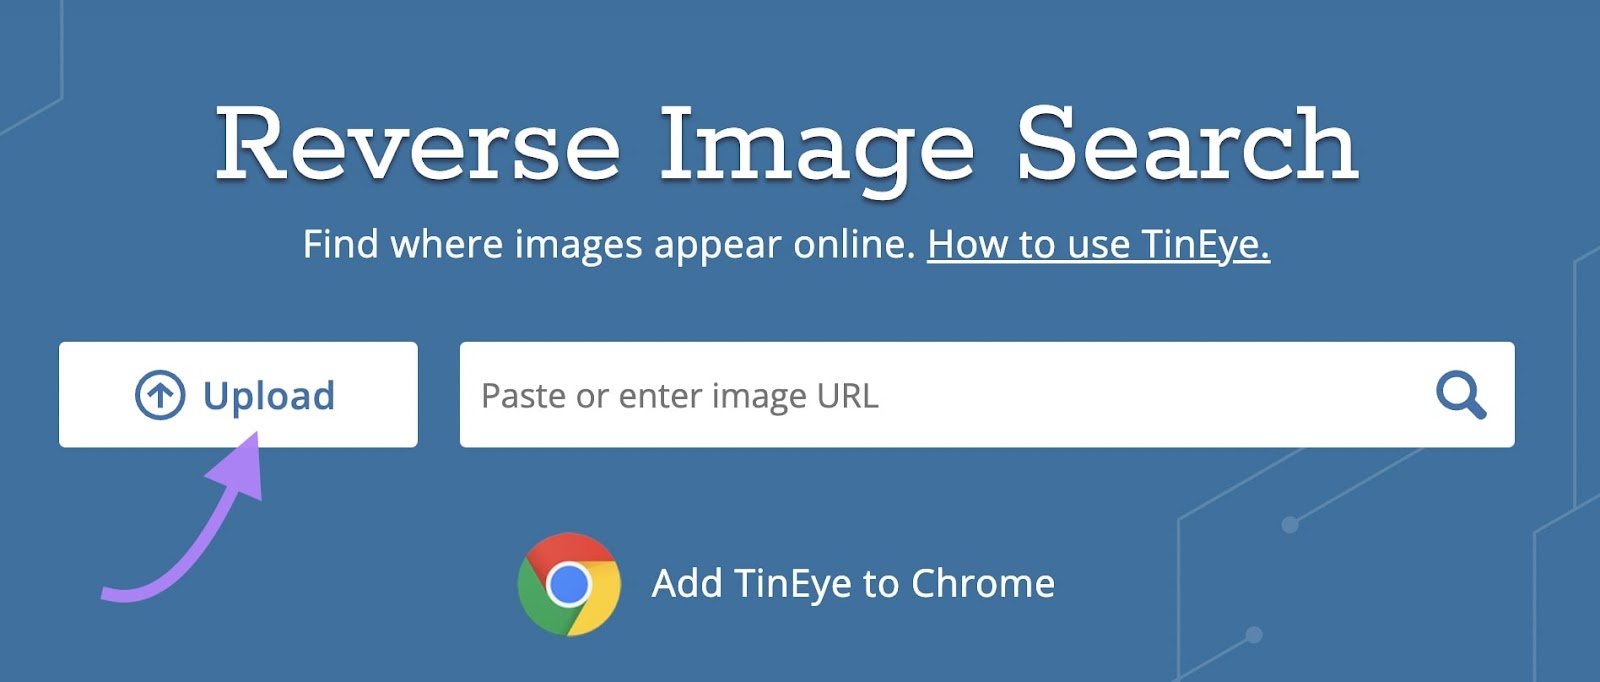 Tineye reverse image search with upload button highlighted